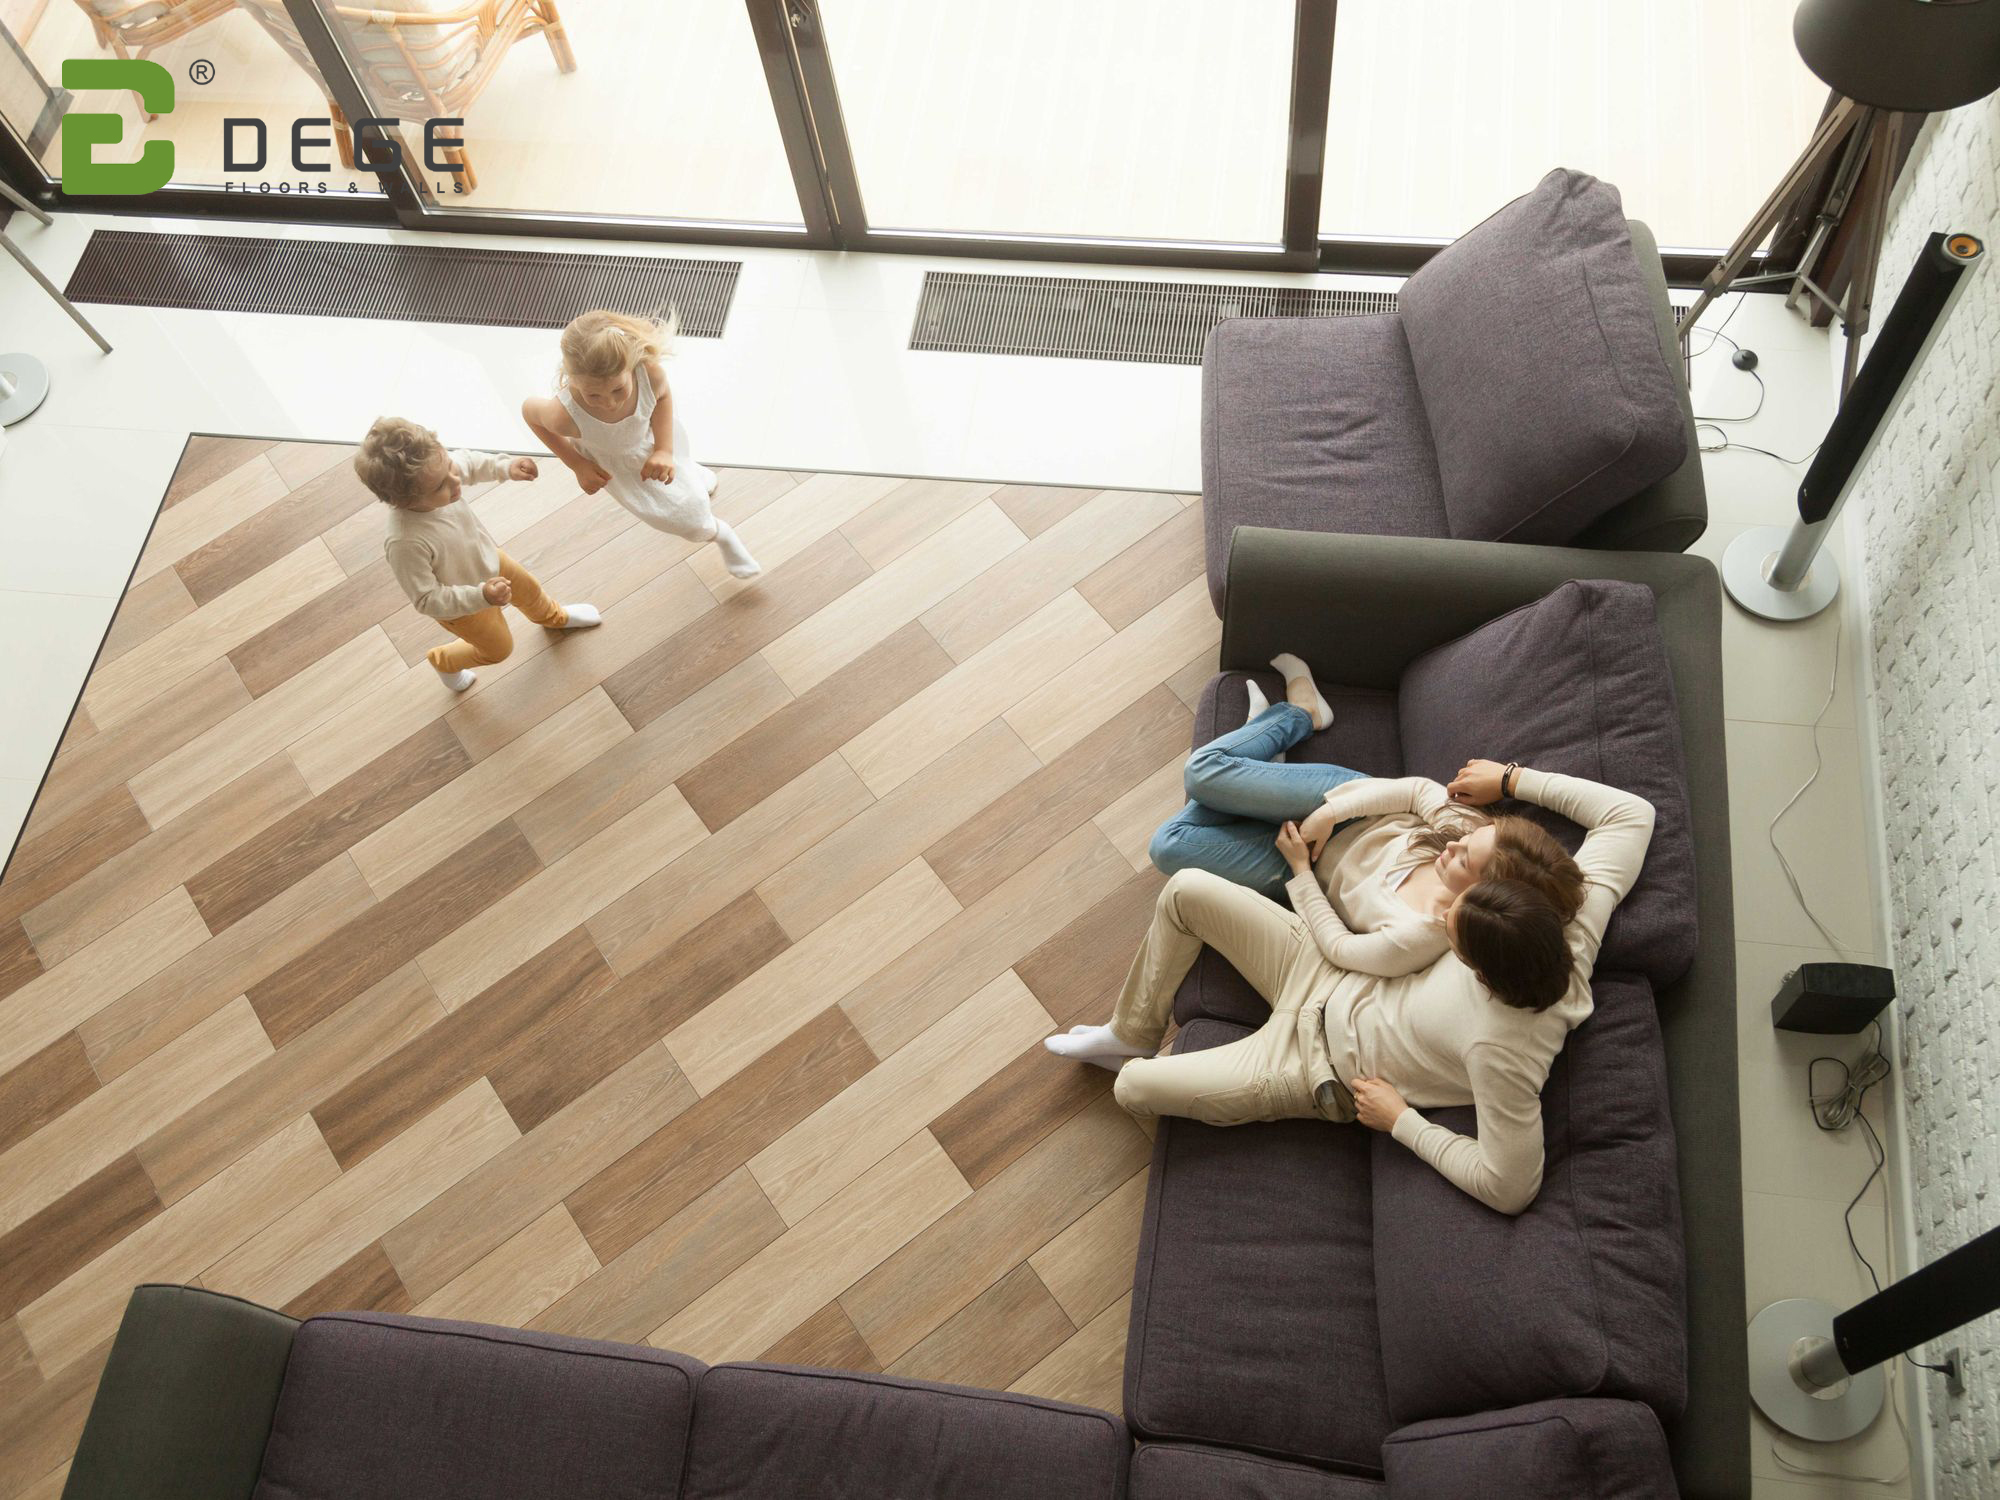 What are the advantages of choosing SPC flooring?